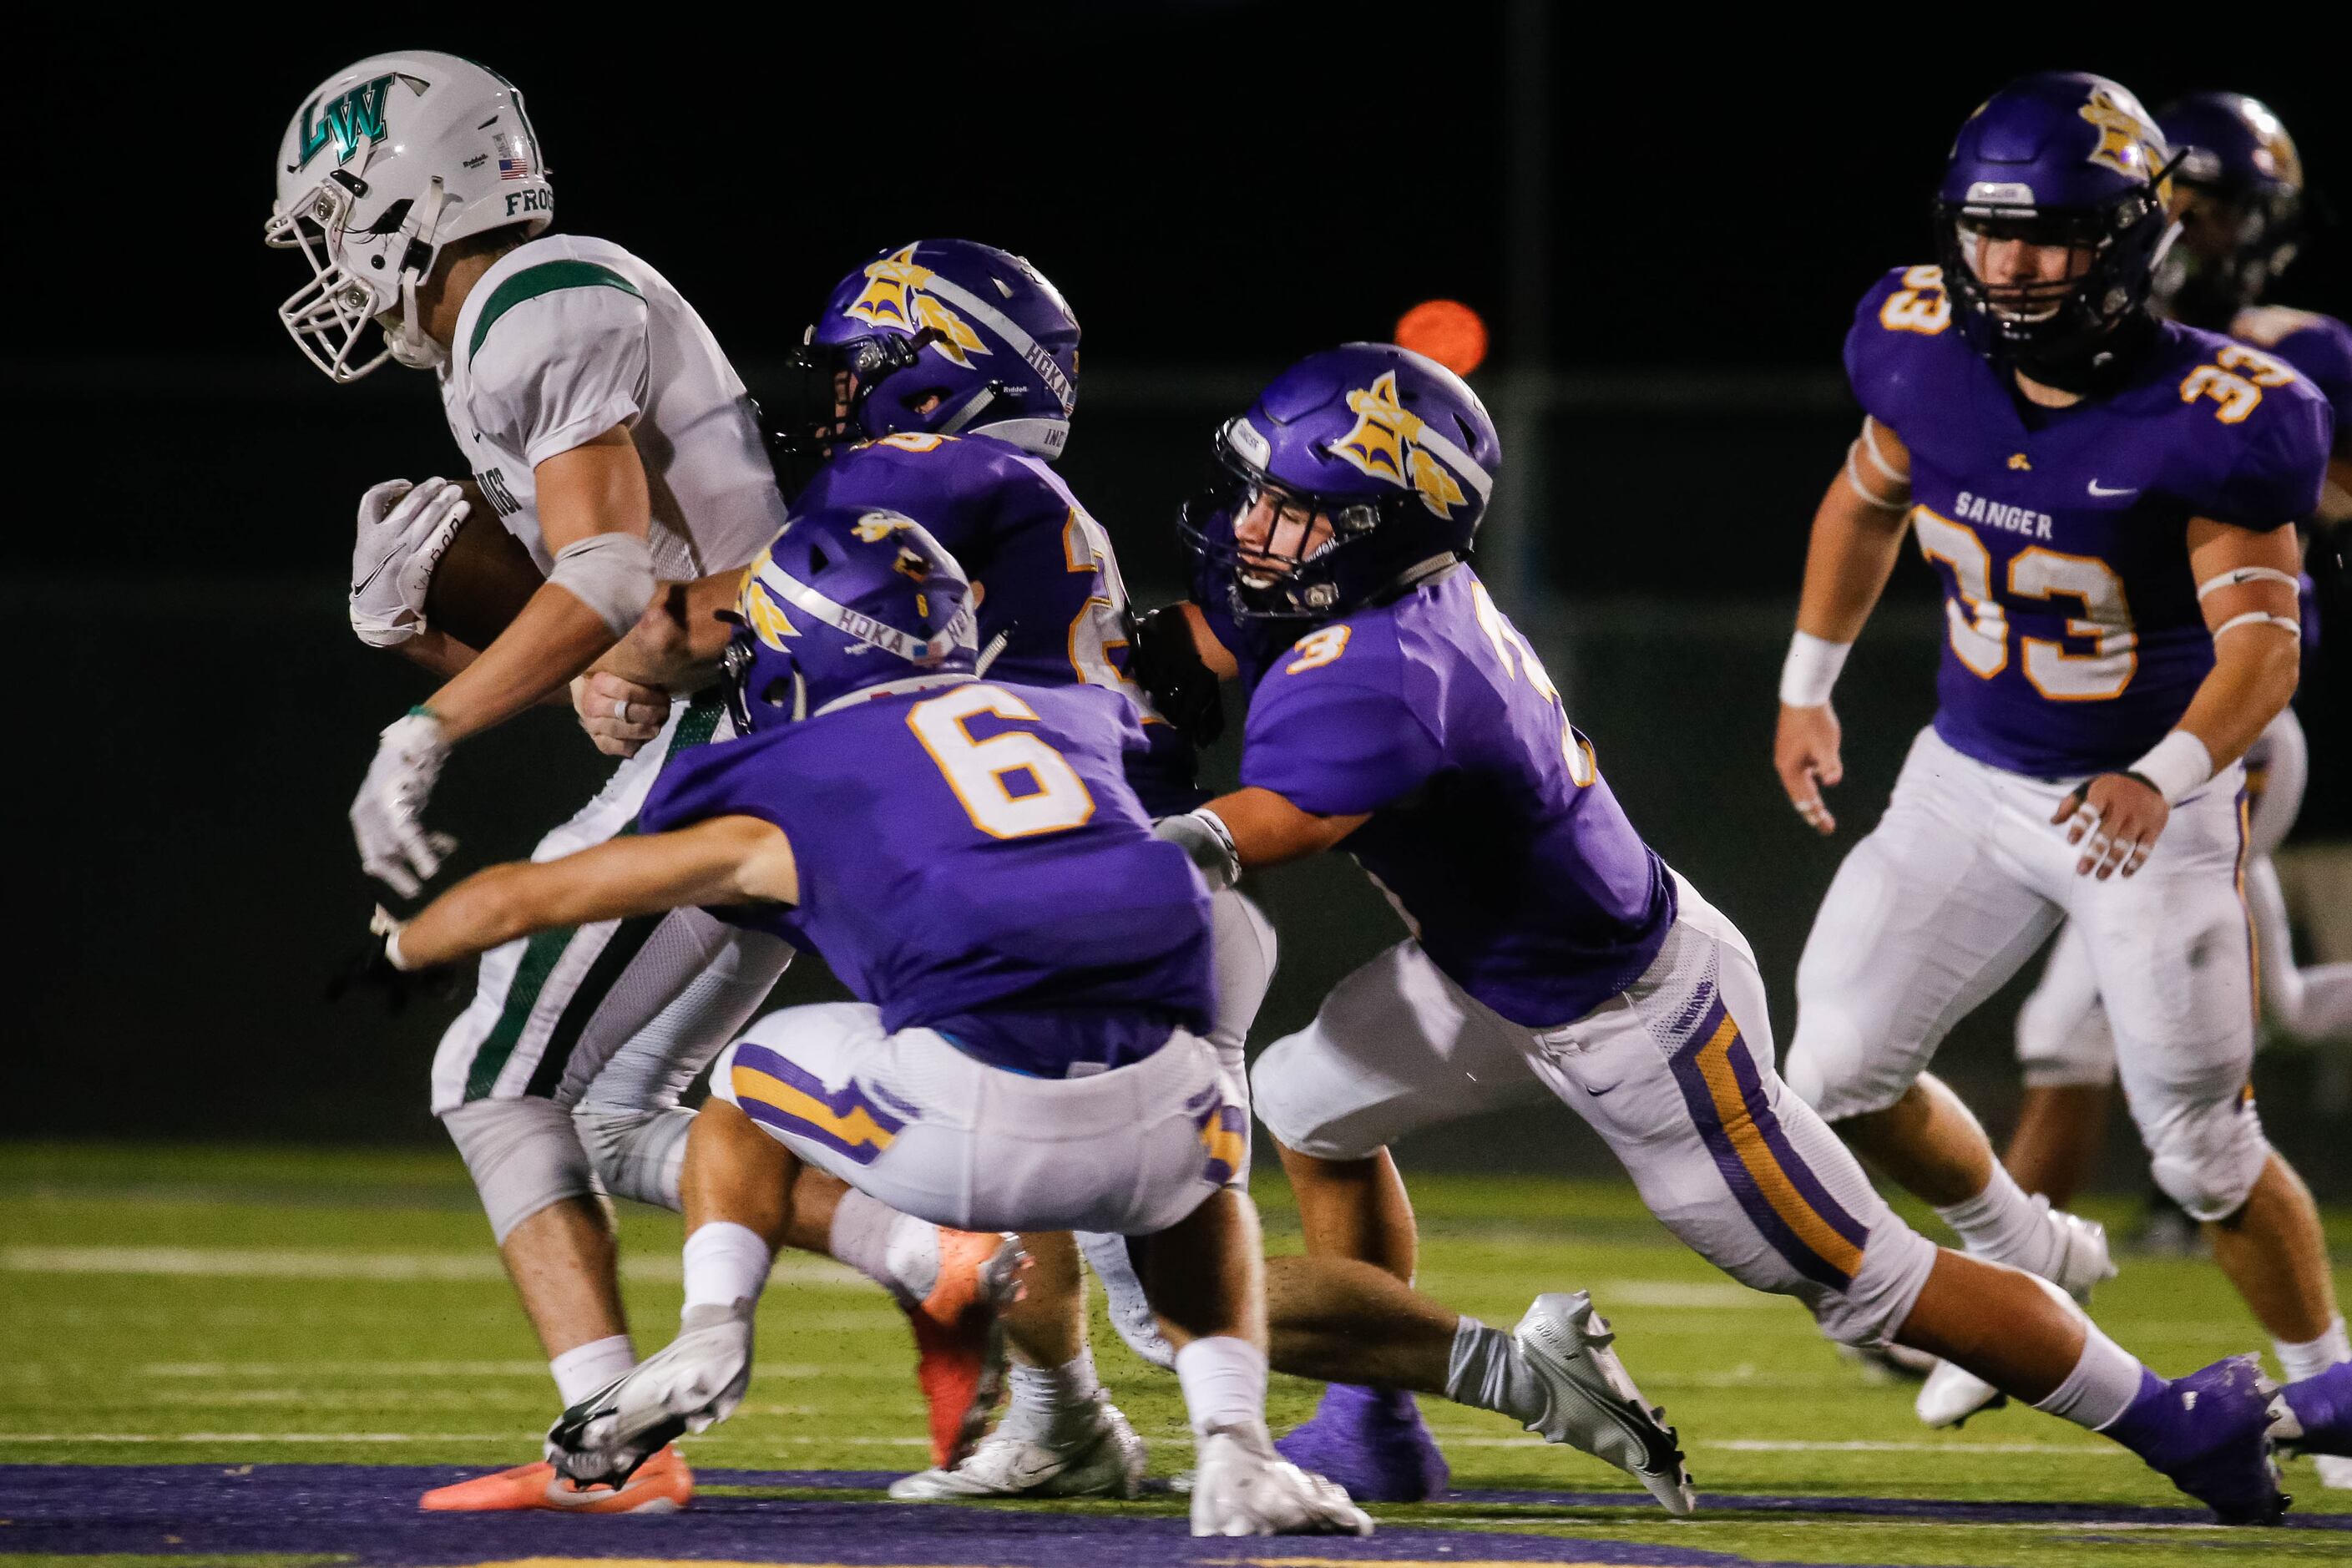 Lake Worth High School's Mark Fulkerson (5) is taken down by the Sanger High School's...